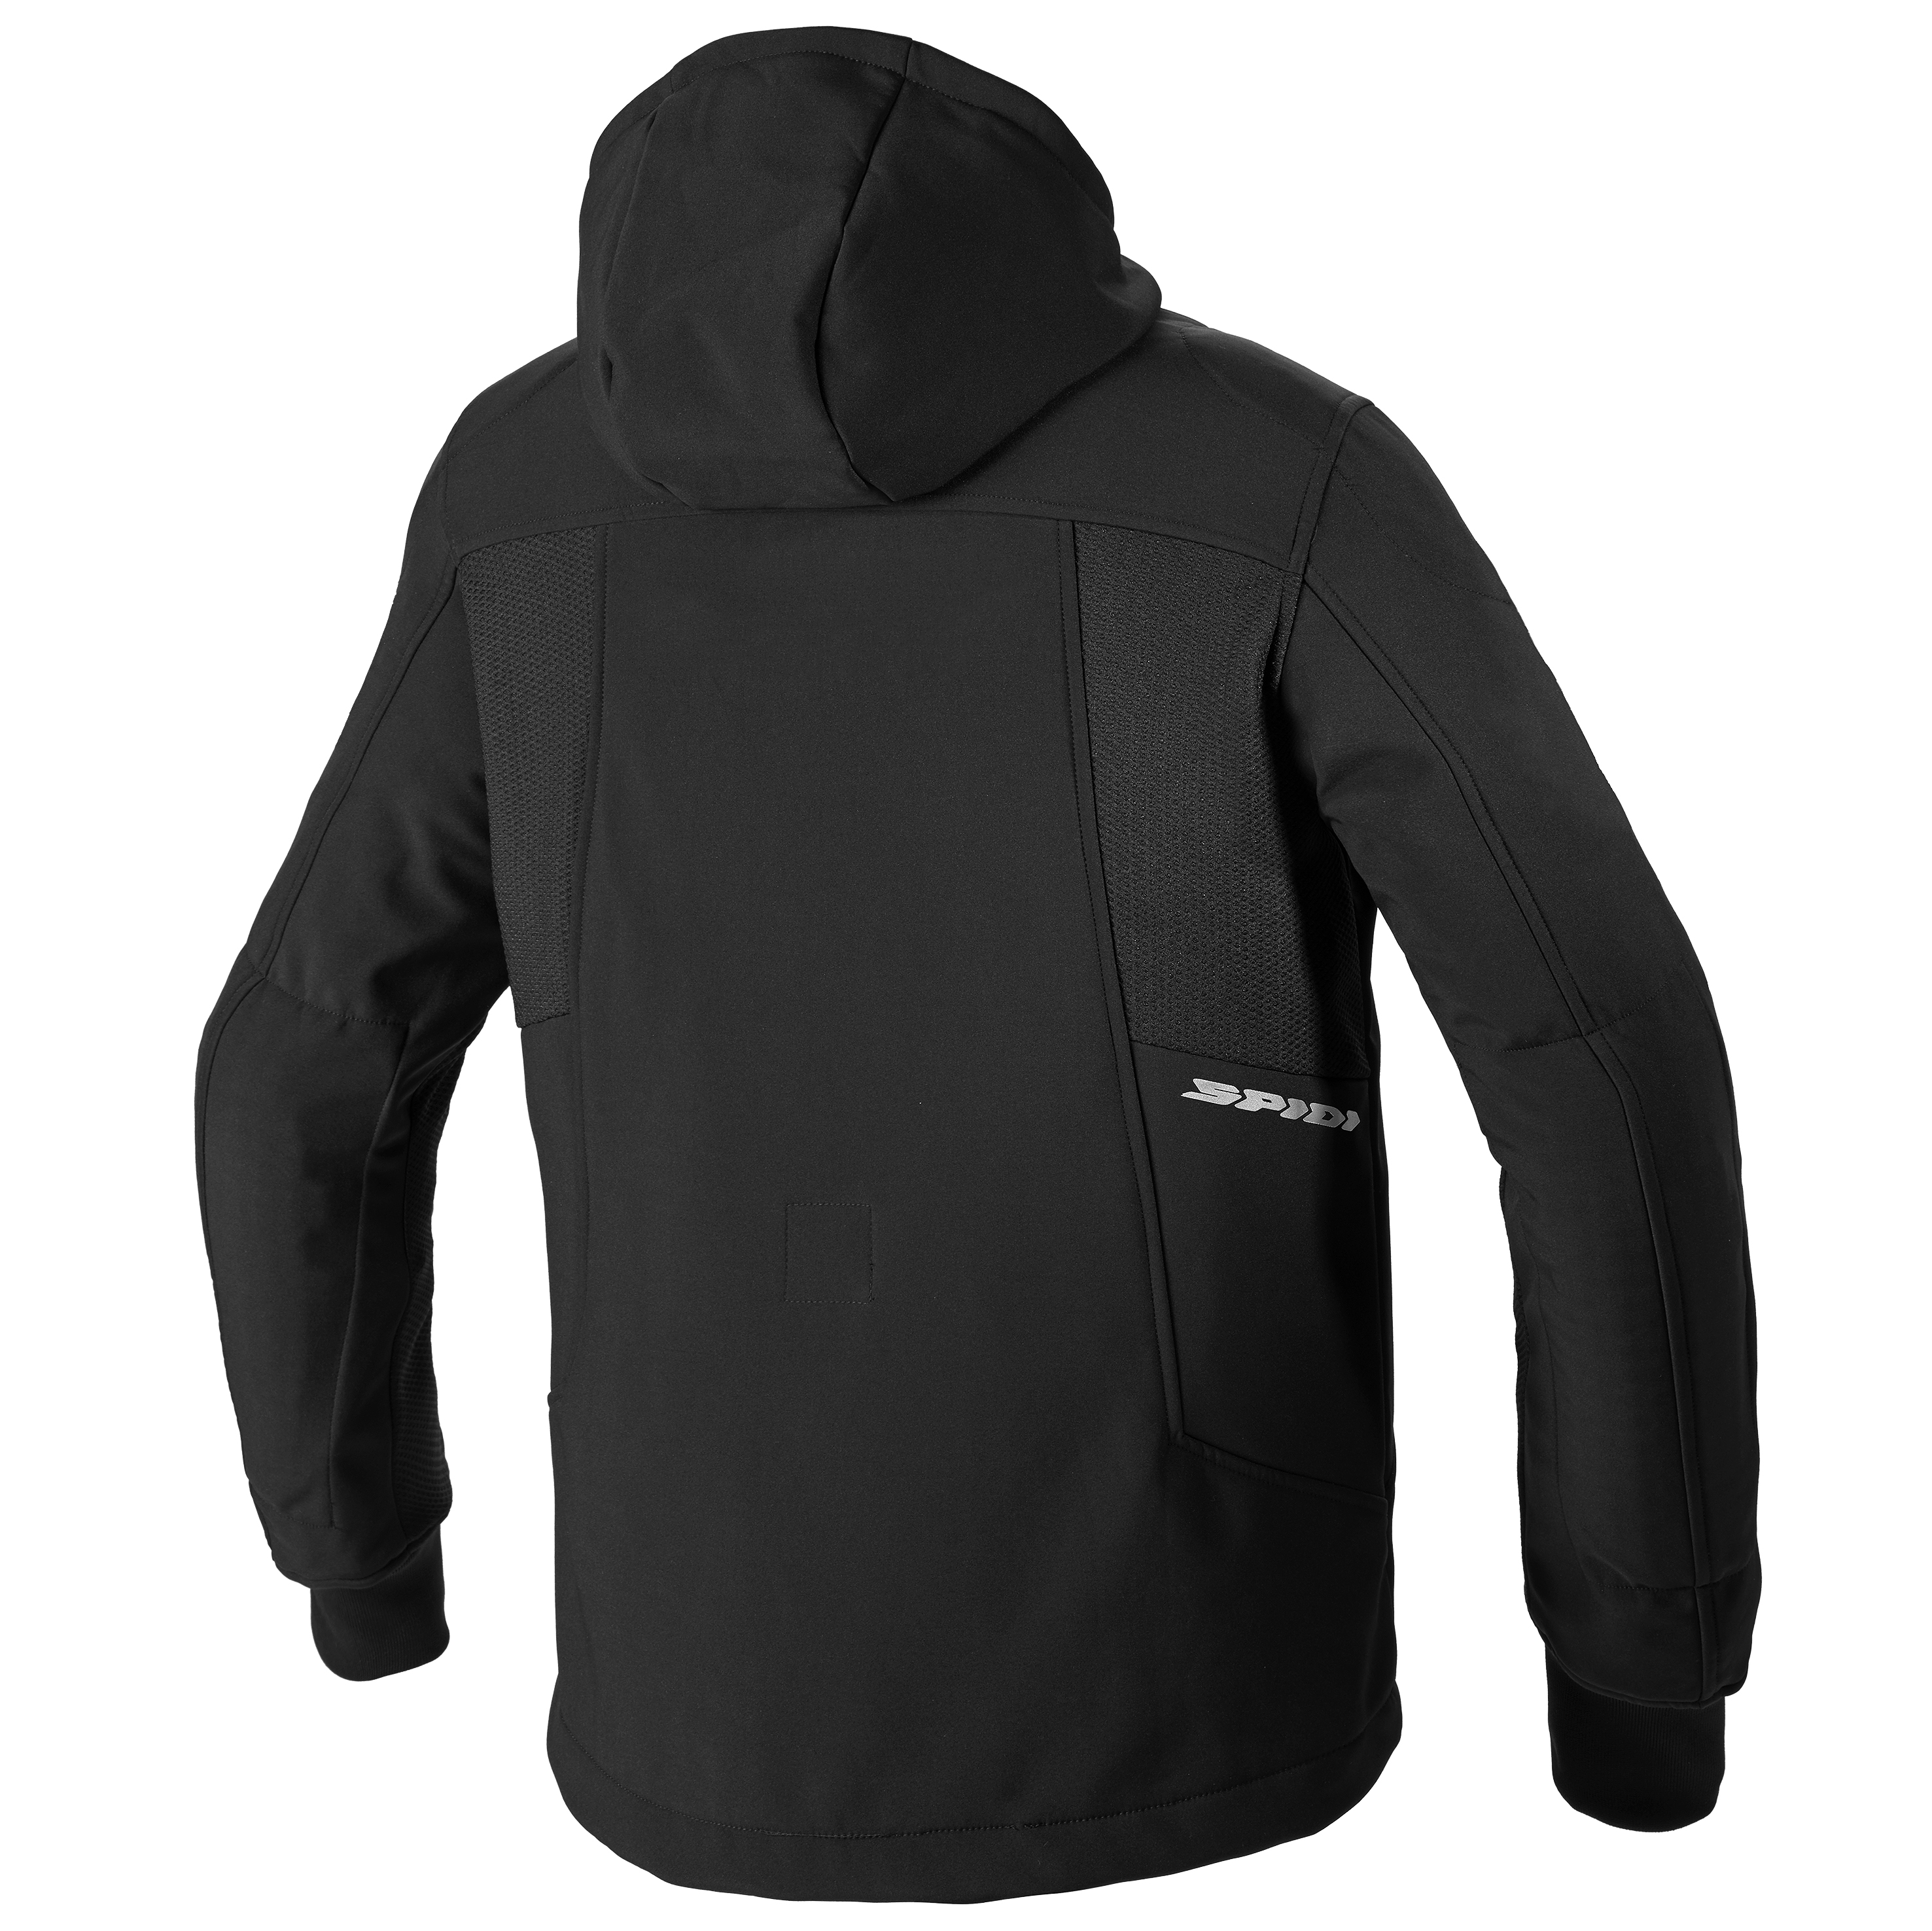 Viewing Images For Spidi Armor Evo Hoodie (SOLD OUT) :: MotorcycleGear.com